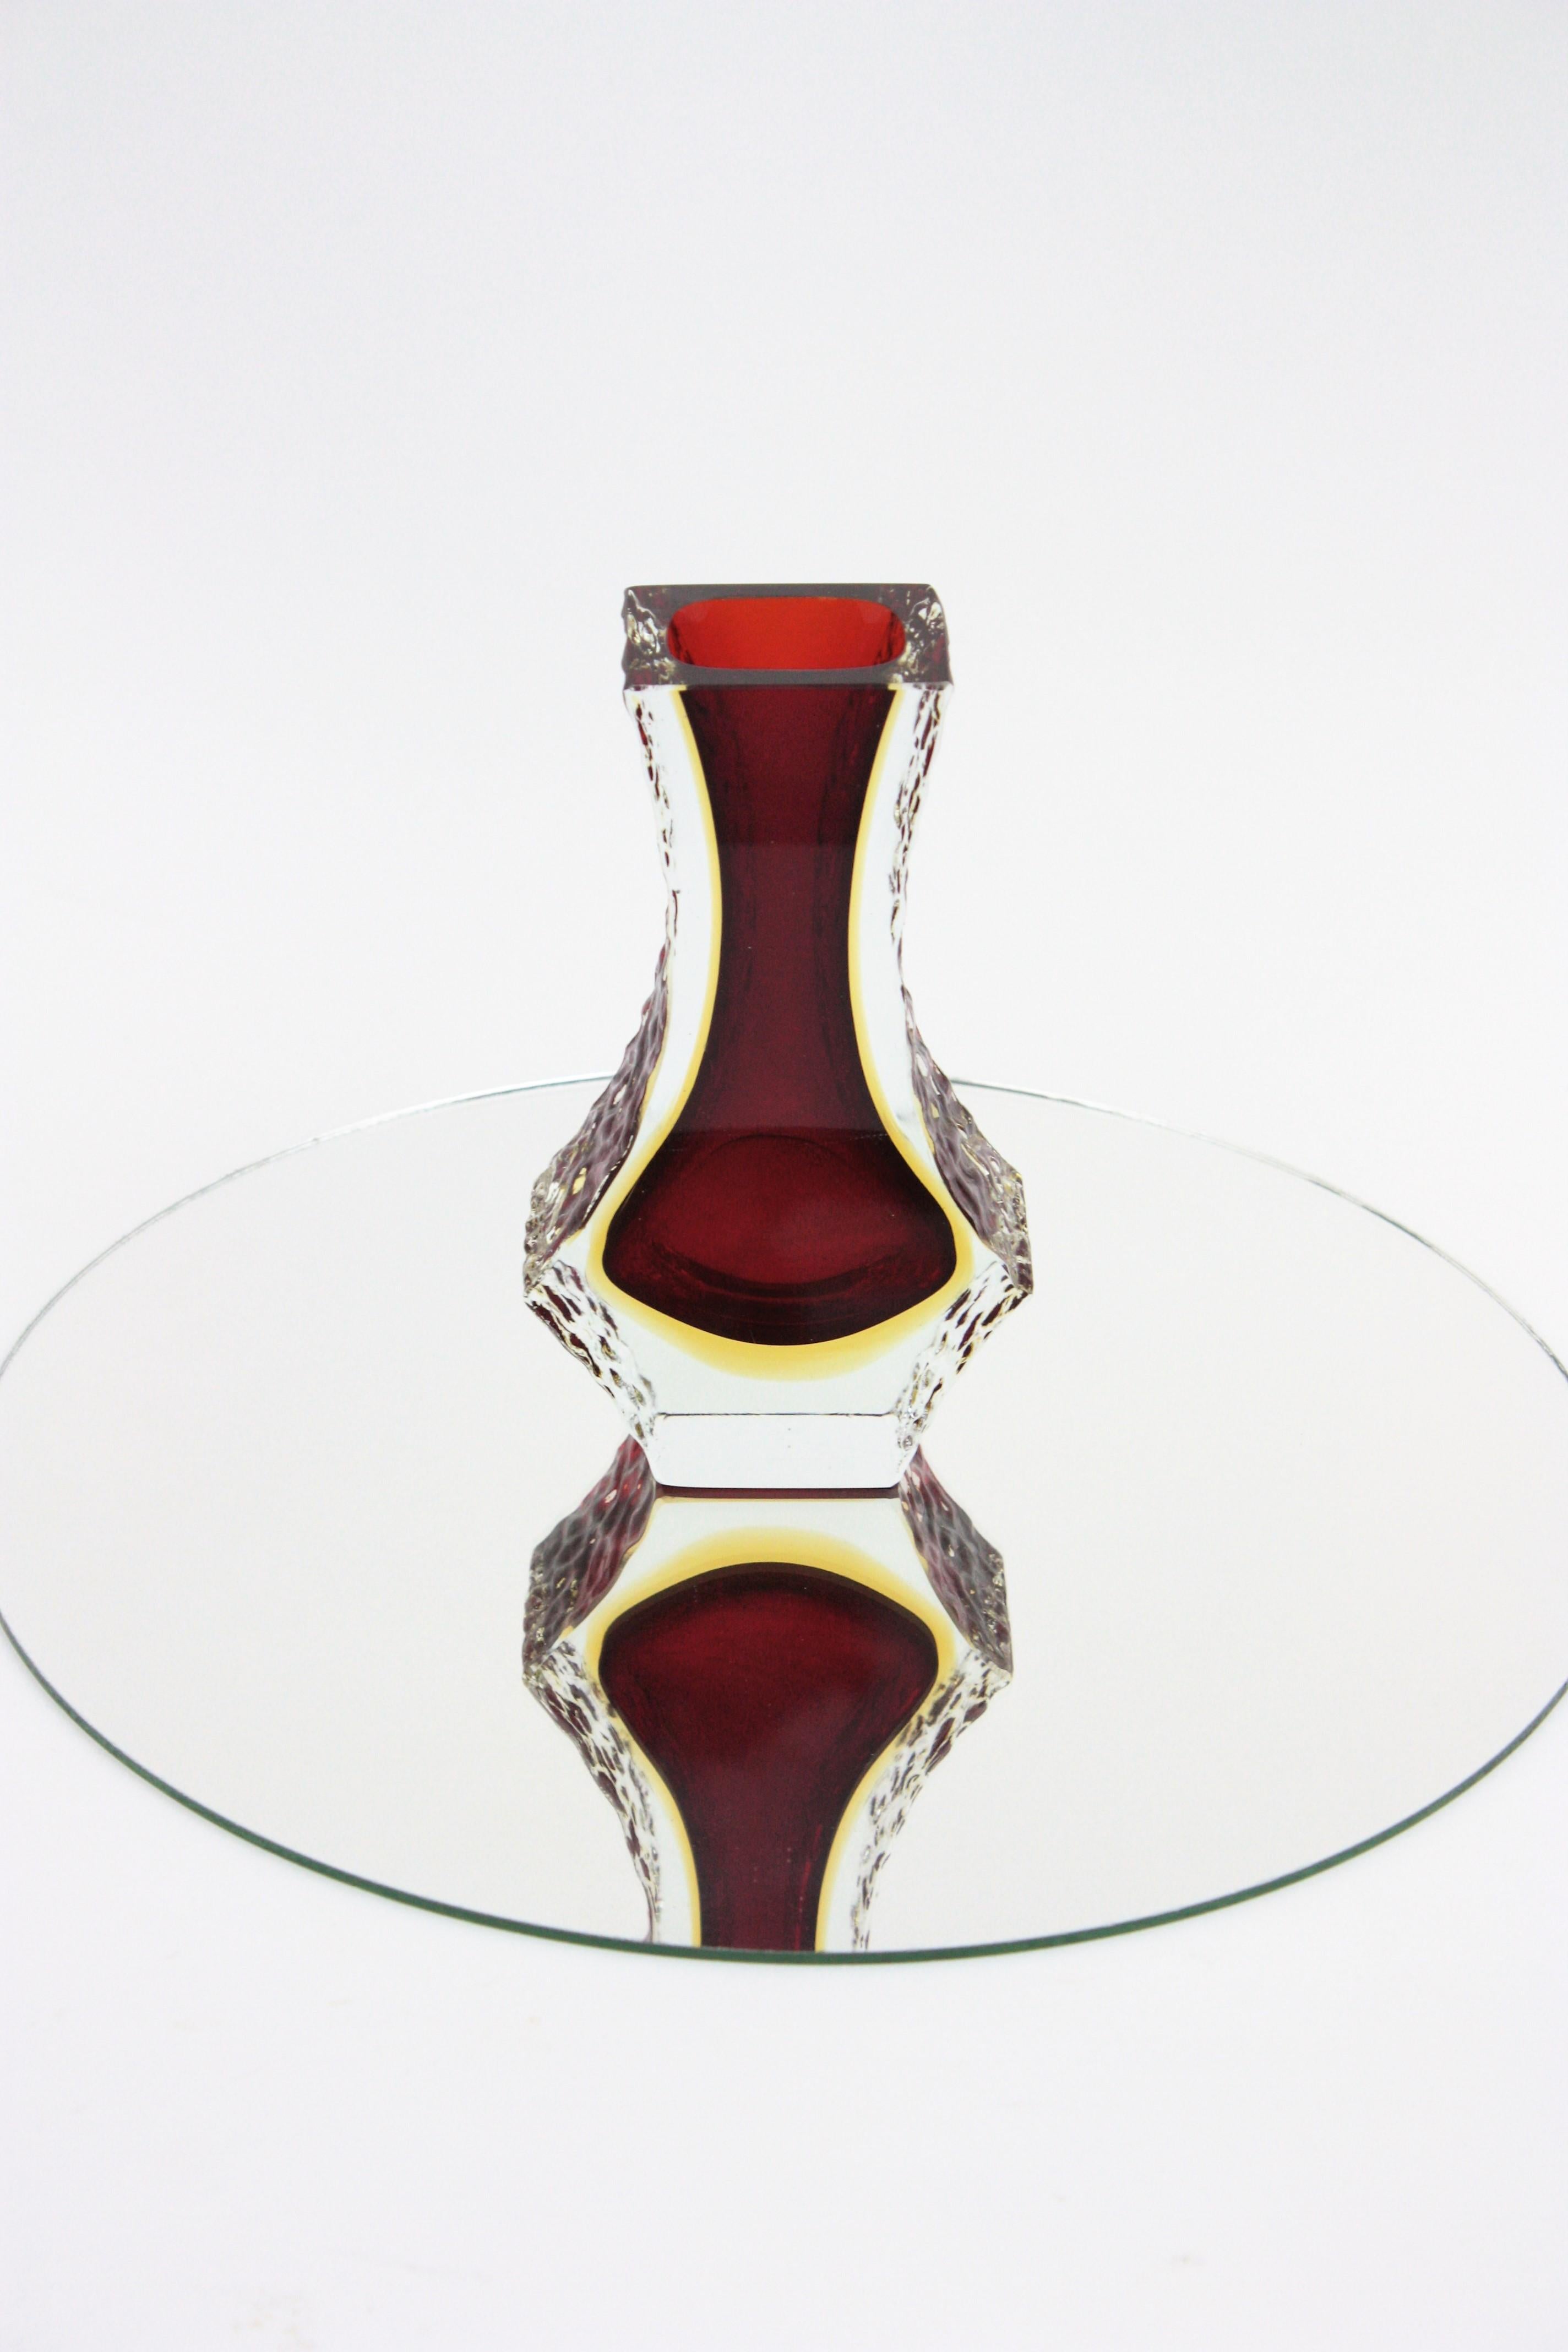 Mandruzzato Murano Sommerso Red Yellow Ice Glass Faceted Vase  In Good Condition For Sale In Barcelona, ES